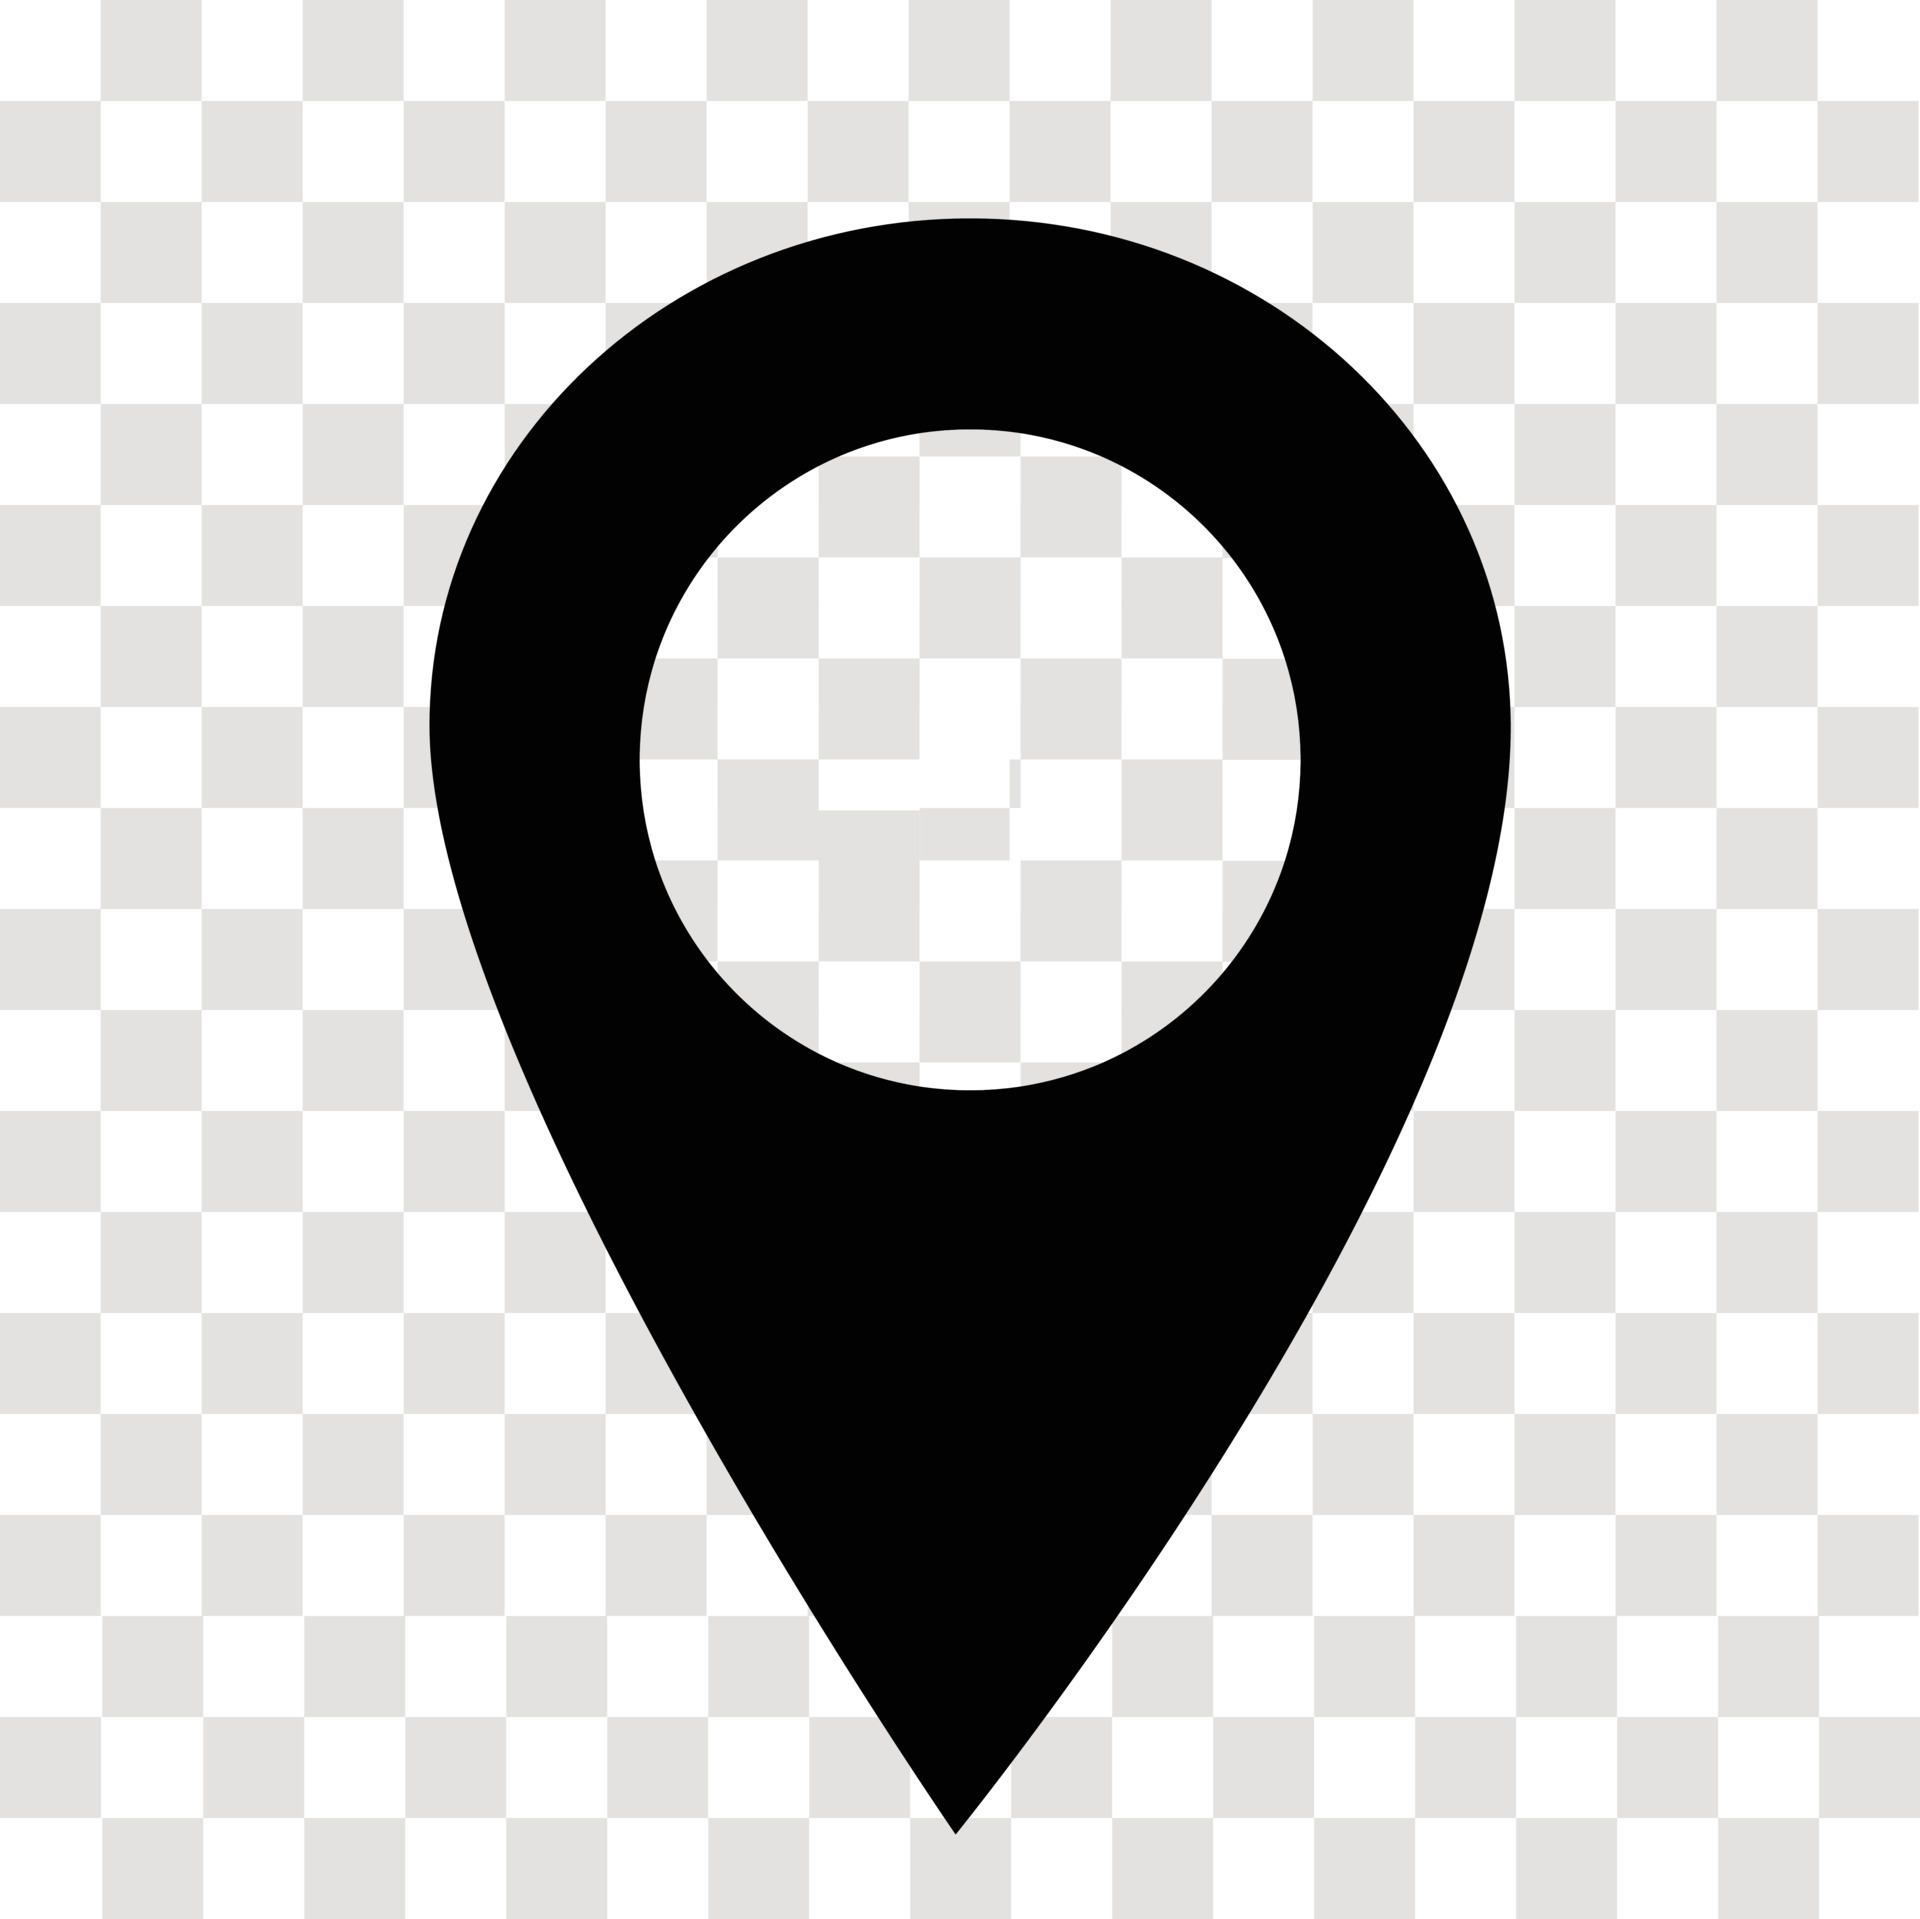 location pin icon on transparent. map marker sign. flat style. map ...